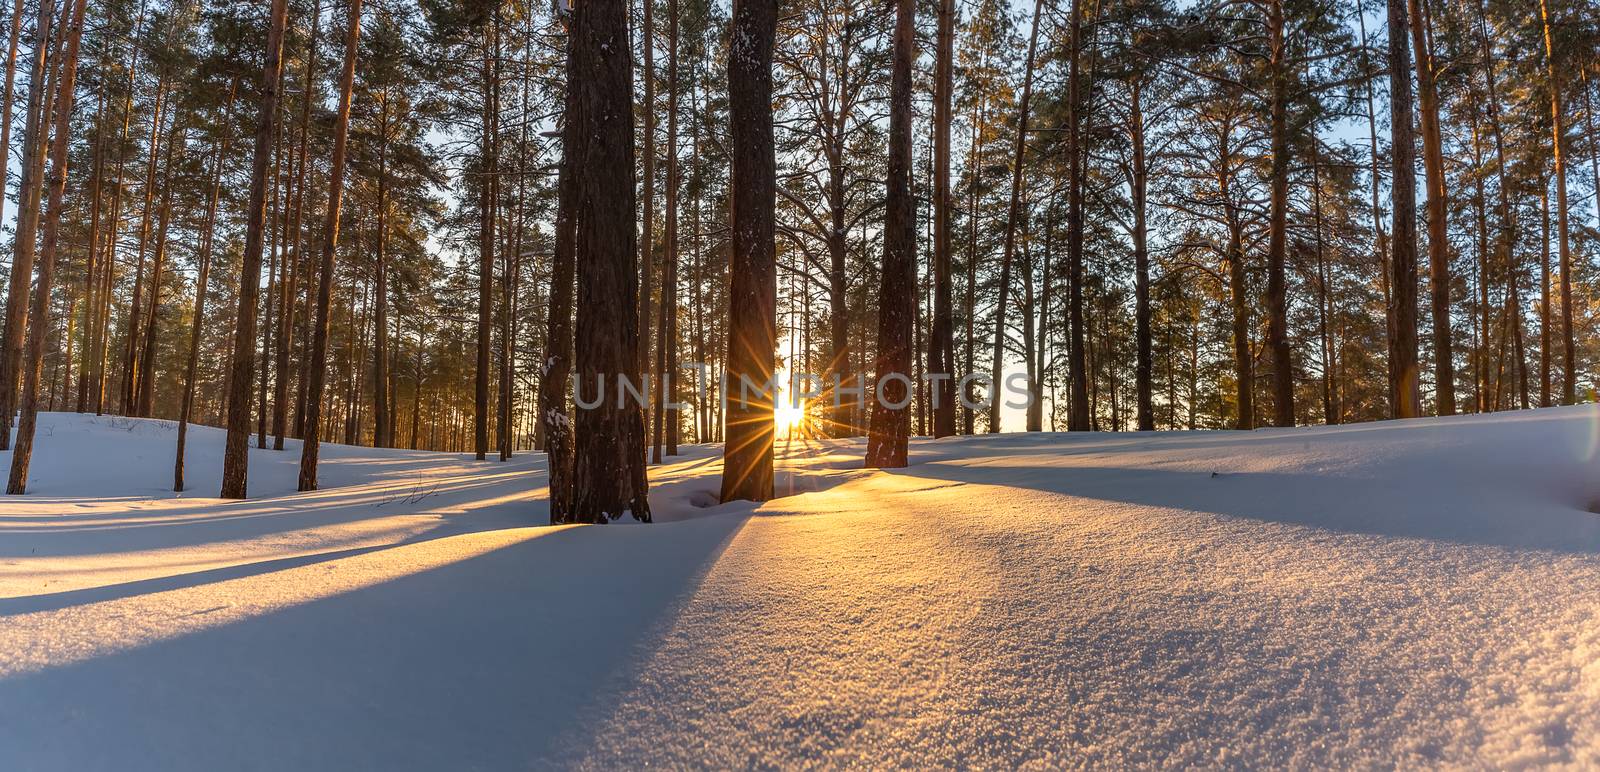 Beautiful snowy winter landscape panorama with forest and sun during golden hour. Winter sunset in forest panoramic view. Sun shines through trees and casts golden light on snow. Russia, Siberia by DamantisZ